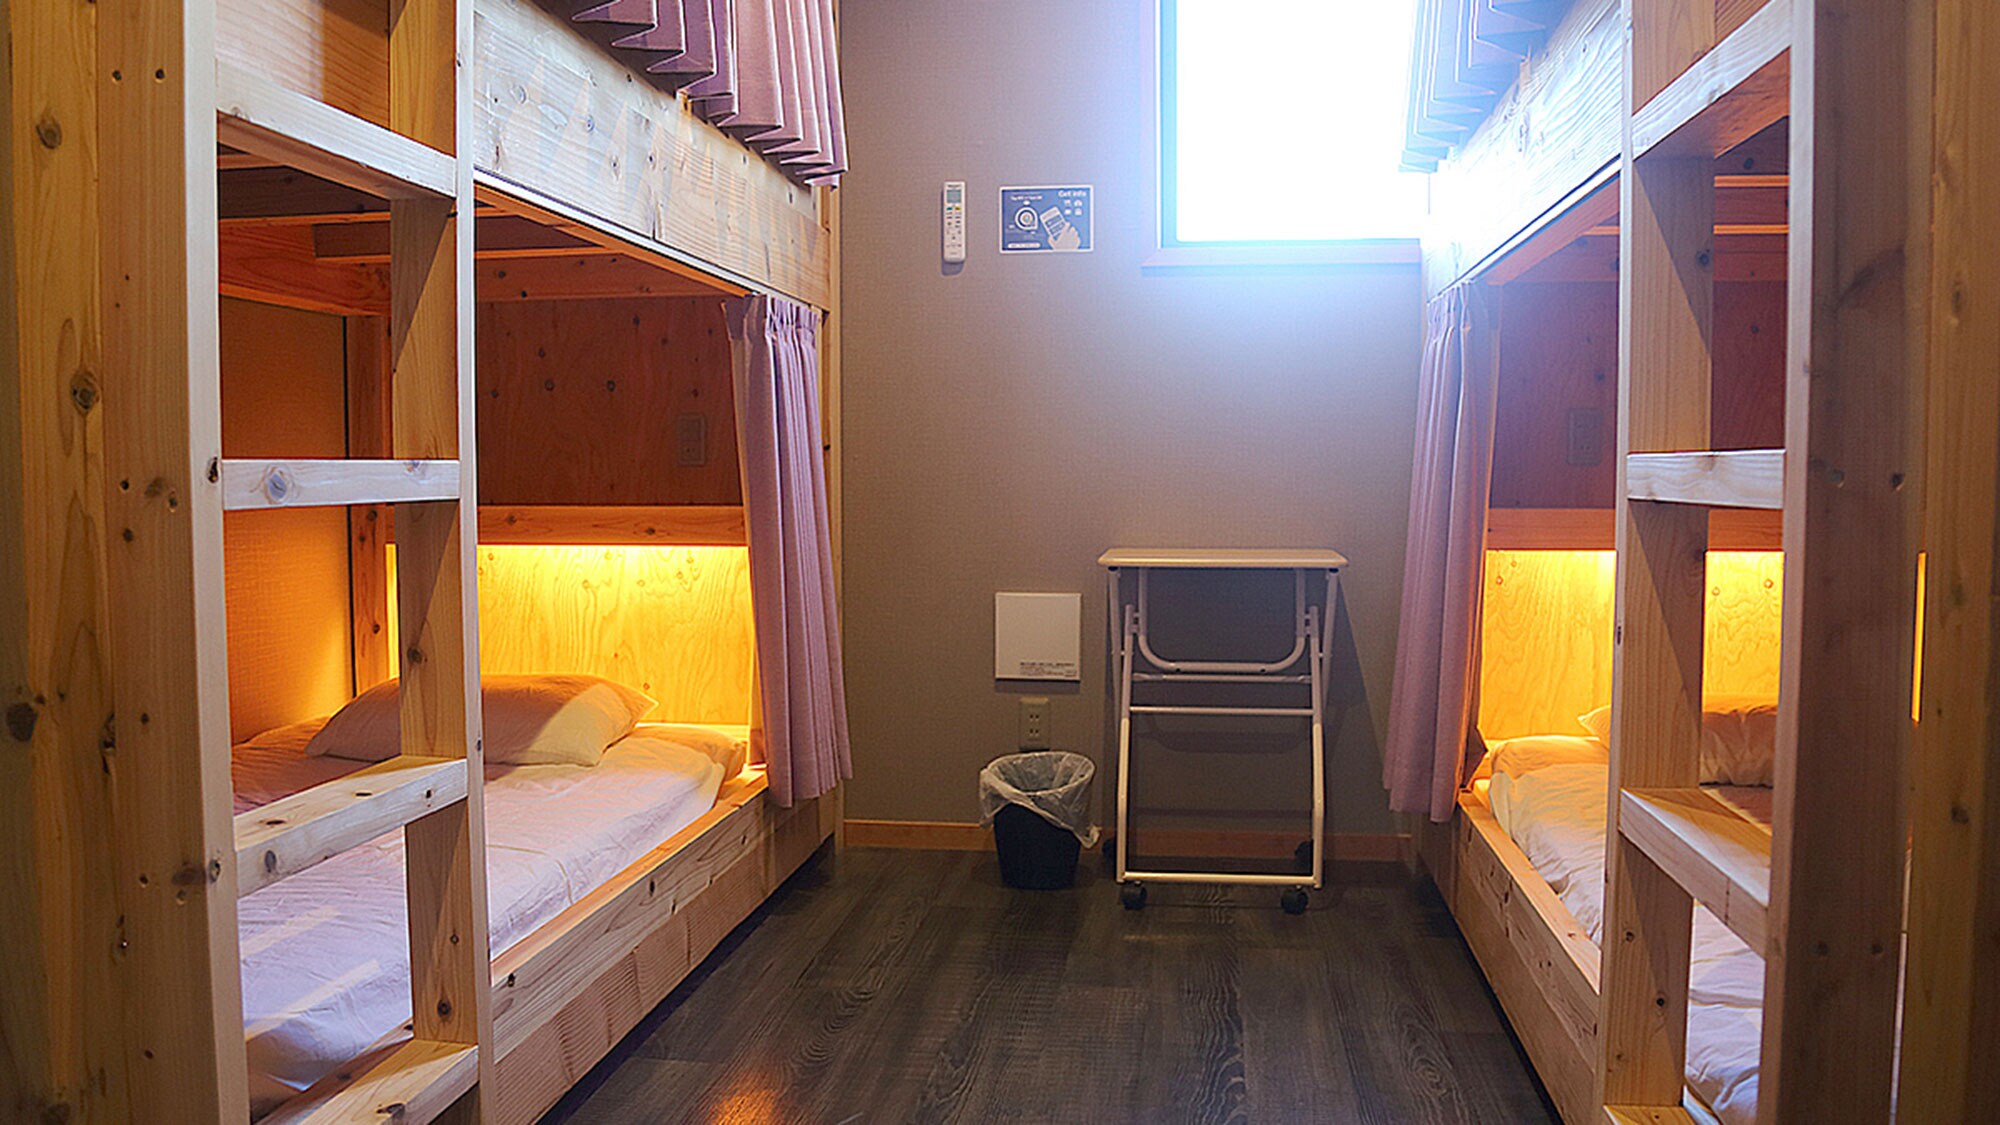 ・ [Dormitory] Two bunk beds installed in one room